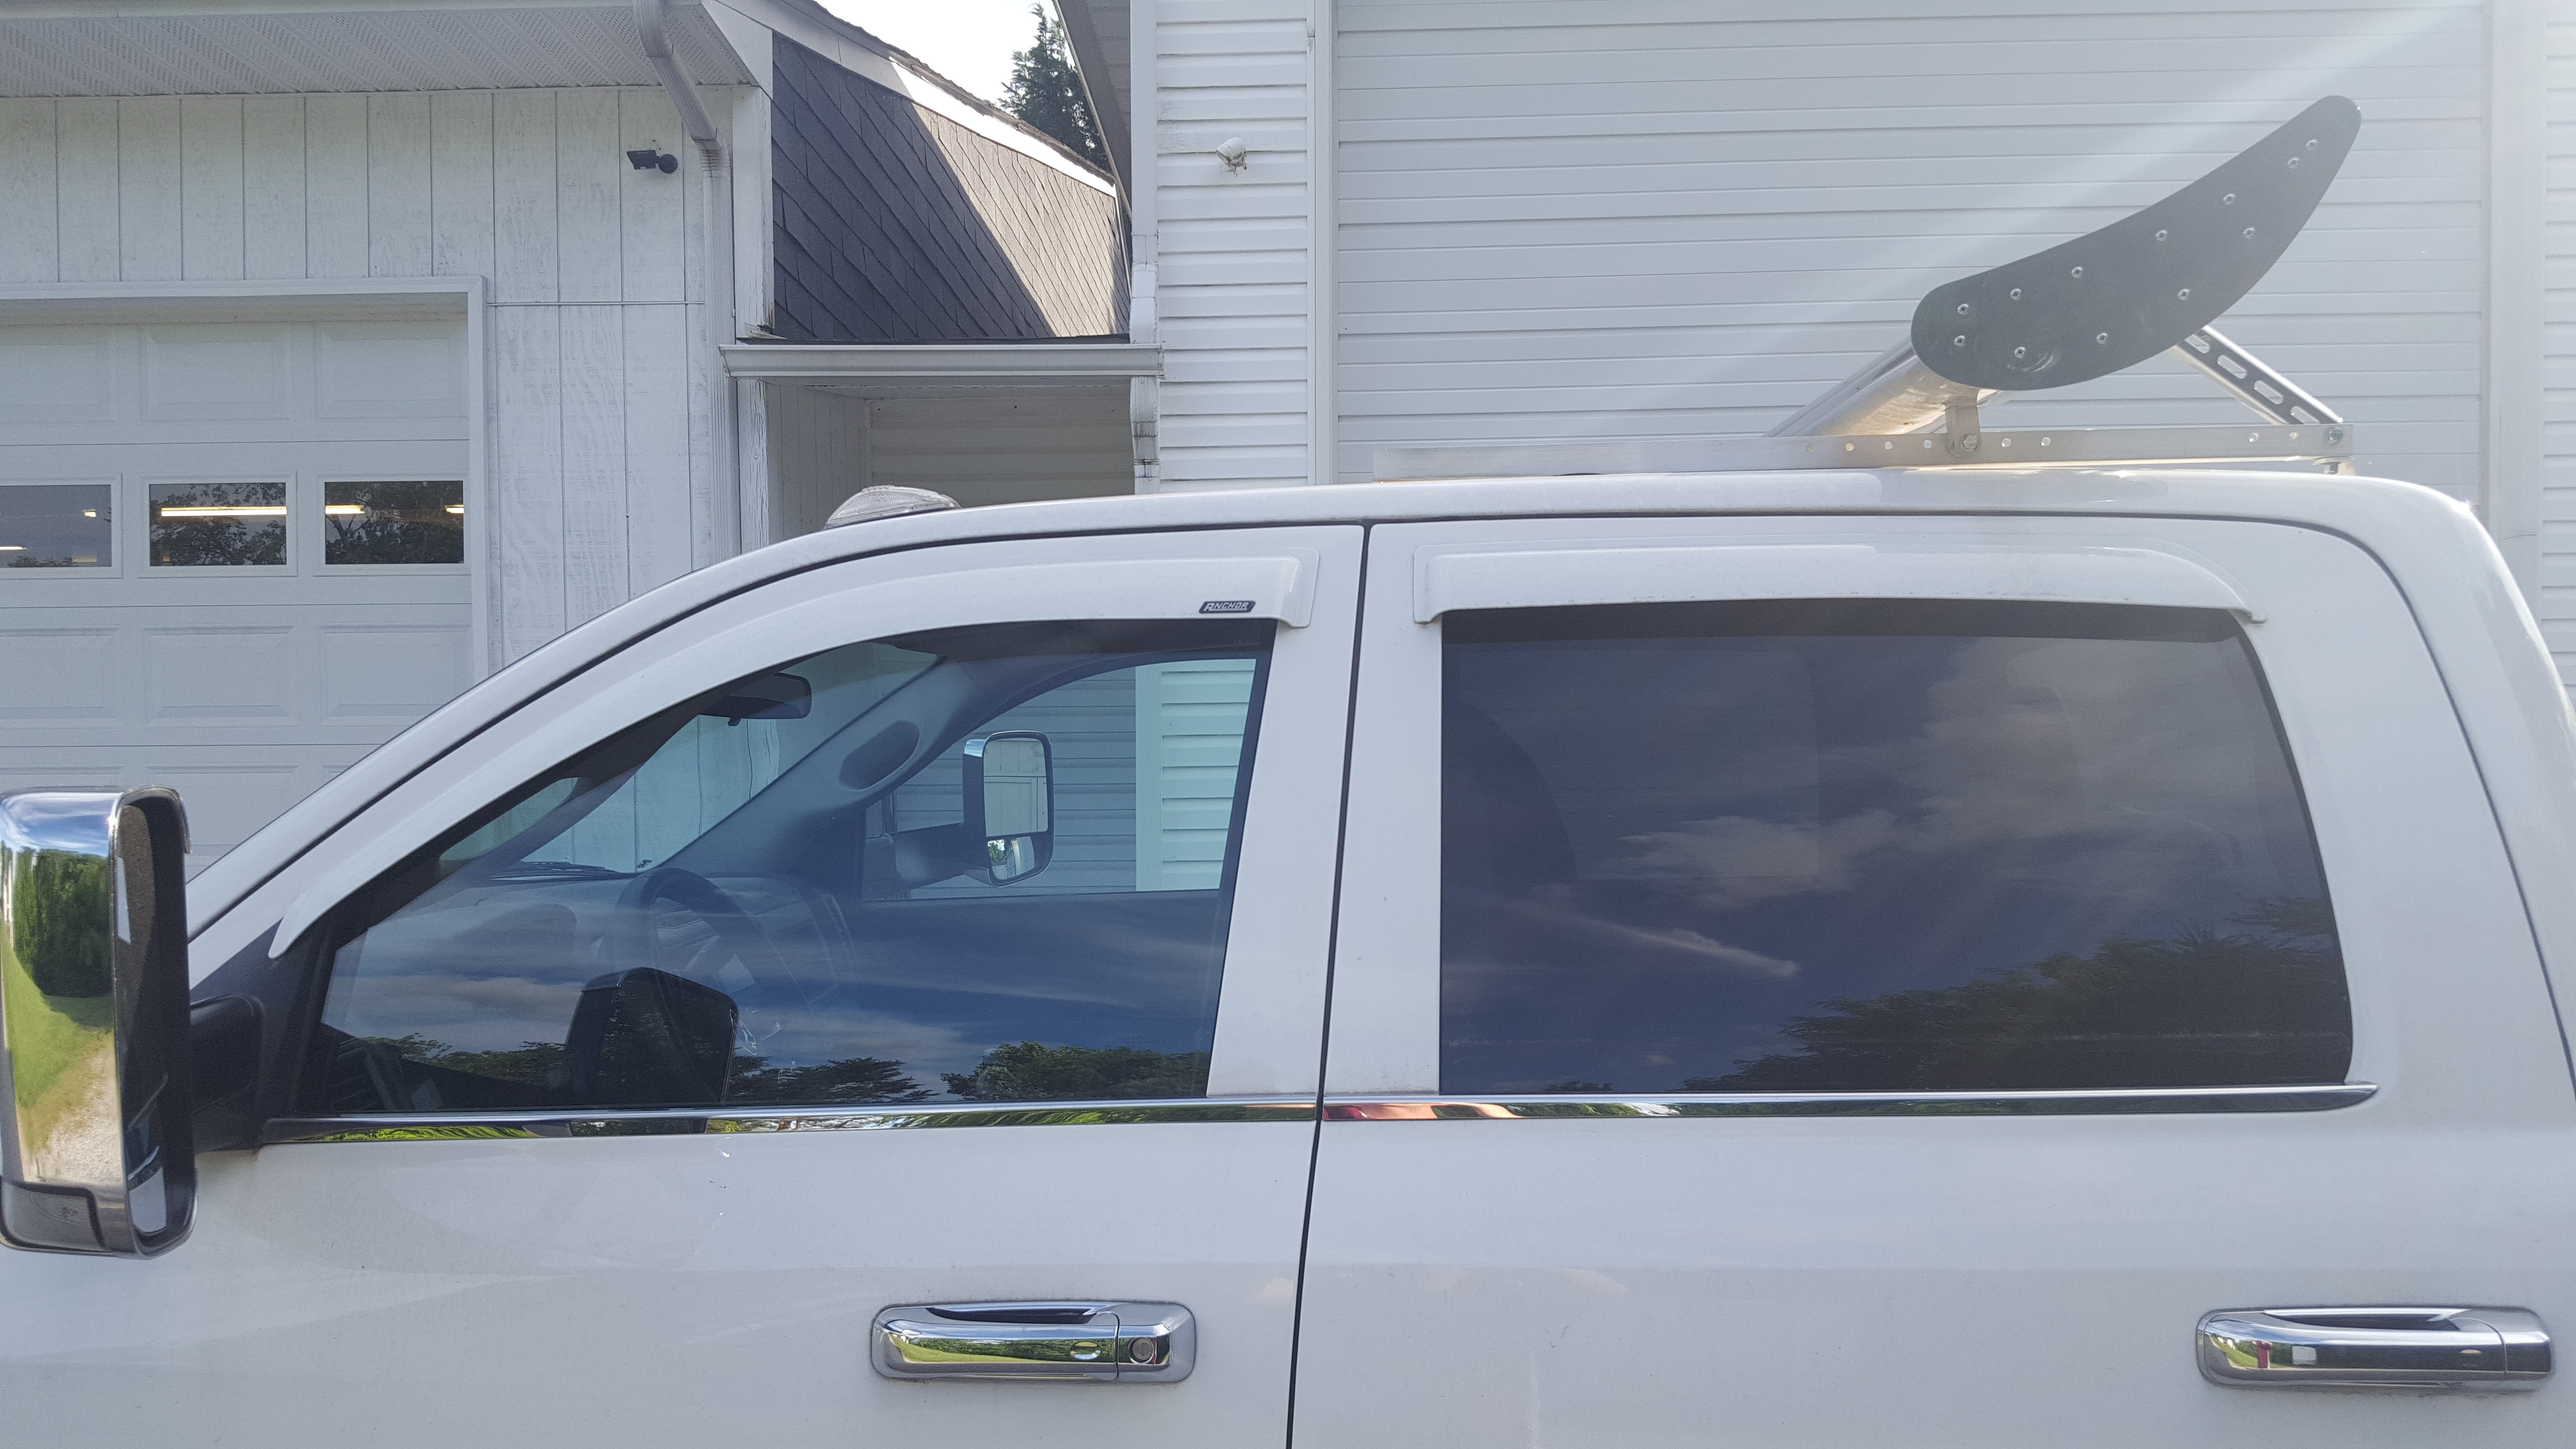 Why Window Visors are Great for Cars